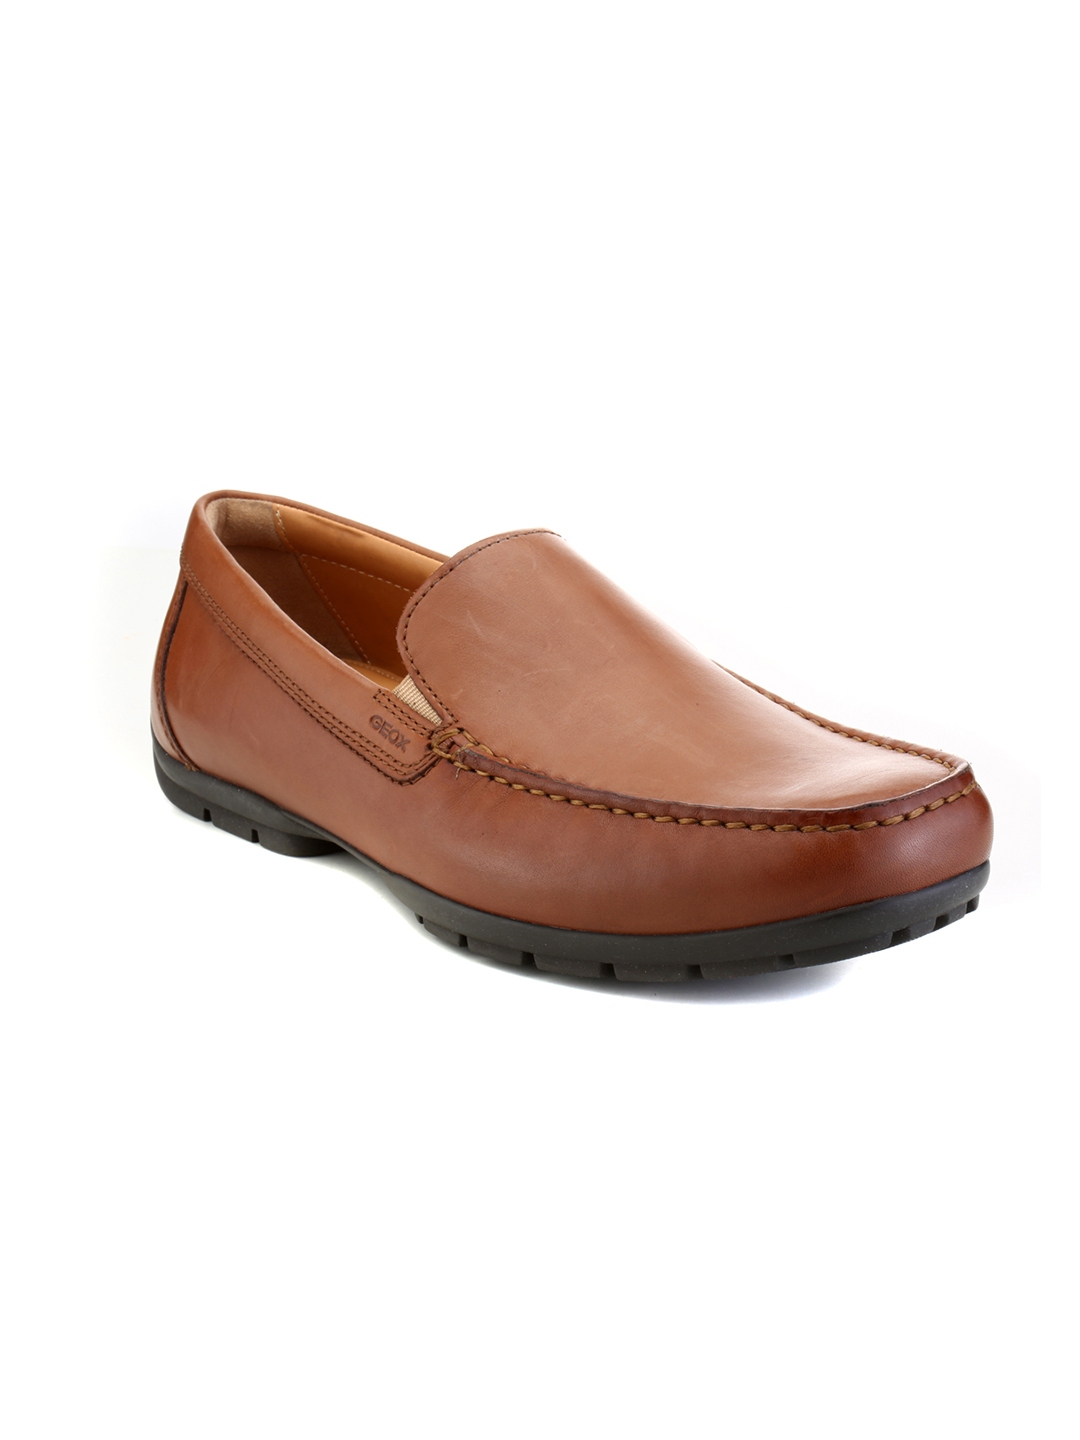 Buy Geox Men Brown Loafers - Casual Shoes for Men 2194397 | Myntra